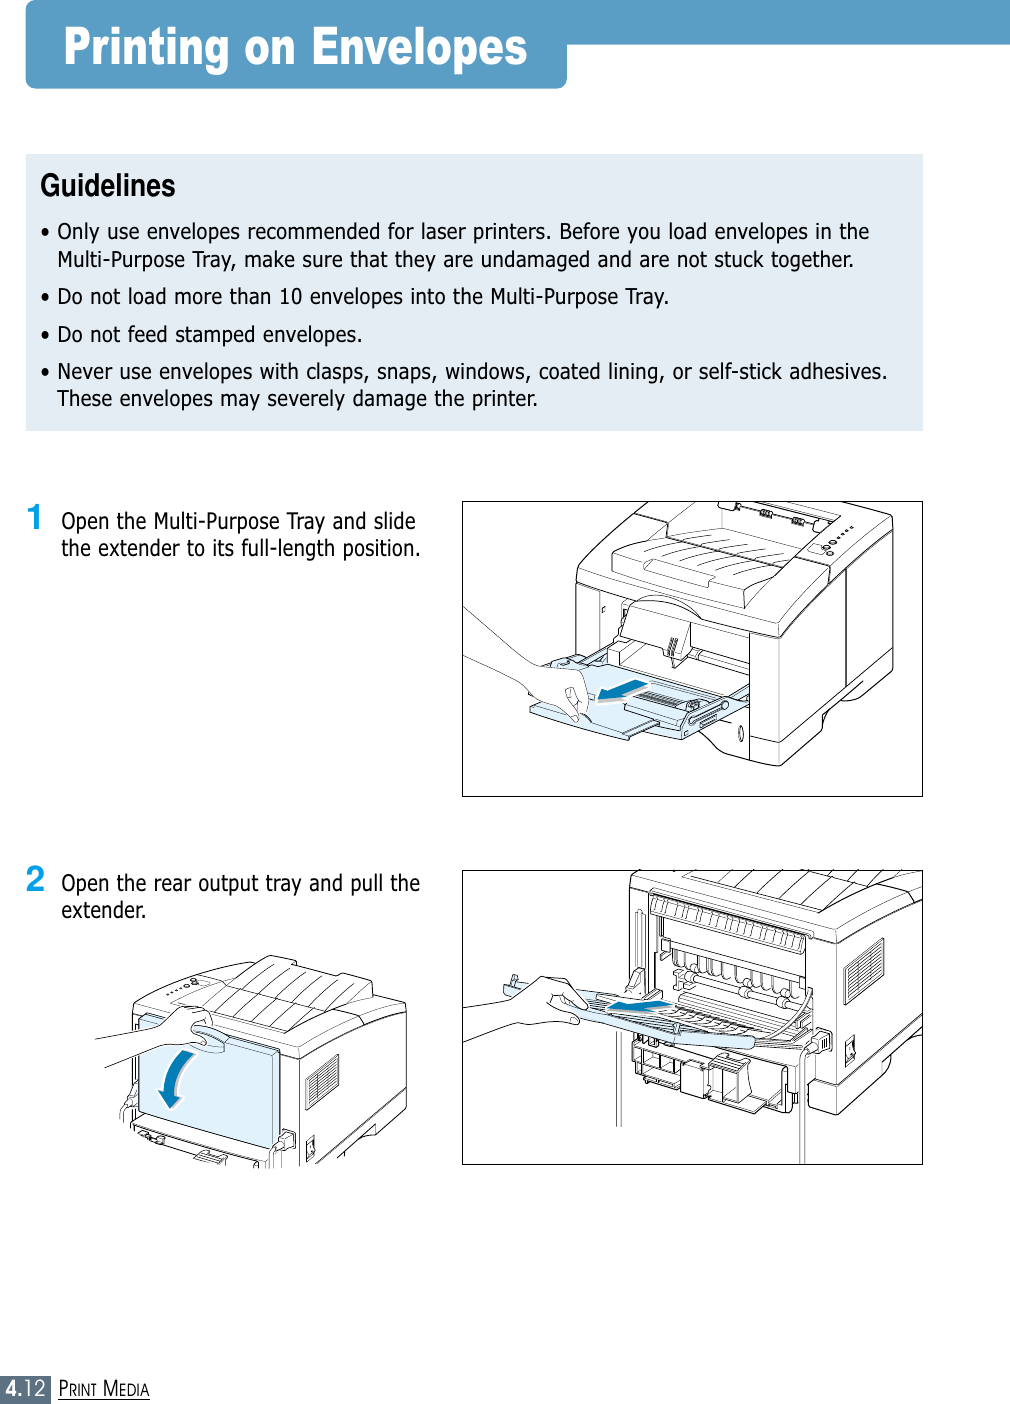 4.12PRINT MEDIAPrinting on EnvelopesGuidelines• Only use envelopes recommended for laser printers. Before you load envelopes in theMulti-Purpose Tray, make sure that they are undamaged and are not stuck together. • Do not load more than 10 envelopes into the Multi-Purpose Tray.• Do not feed stamped envelopes.• Never use envelopes with clasps, snaps, windows, coated lining, or self-stick adhesives.These envelopes may severely damage the printer.1Open the Multi-Purpose Tray and slidethe extender to its full-length position.2Open the rear output tray and pull theextender.